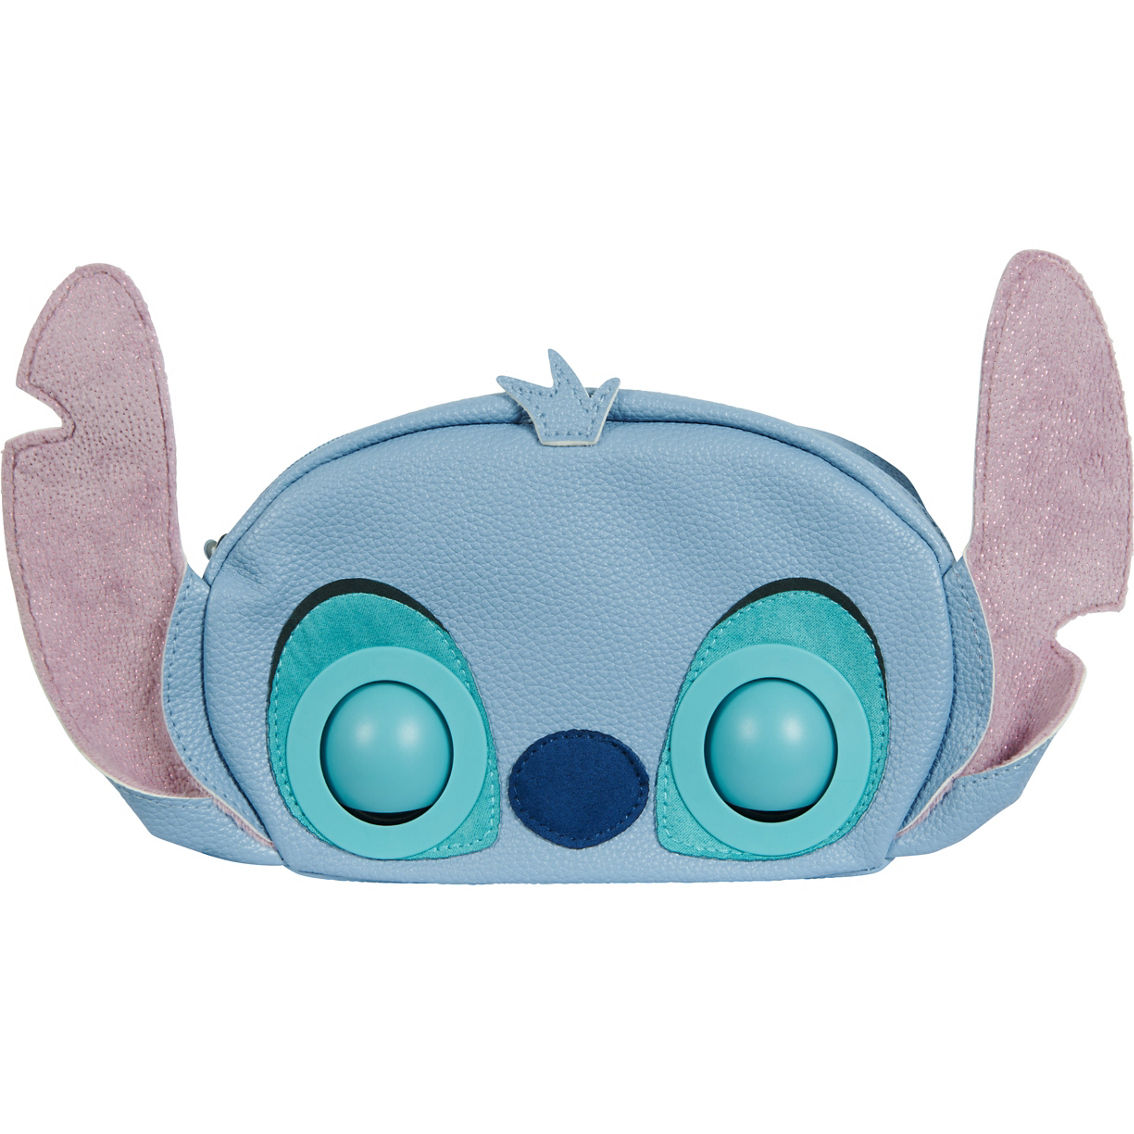 Spin Master Purse Pets Disney Interactive Stitch - Image 2 of 5